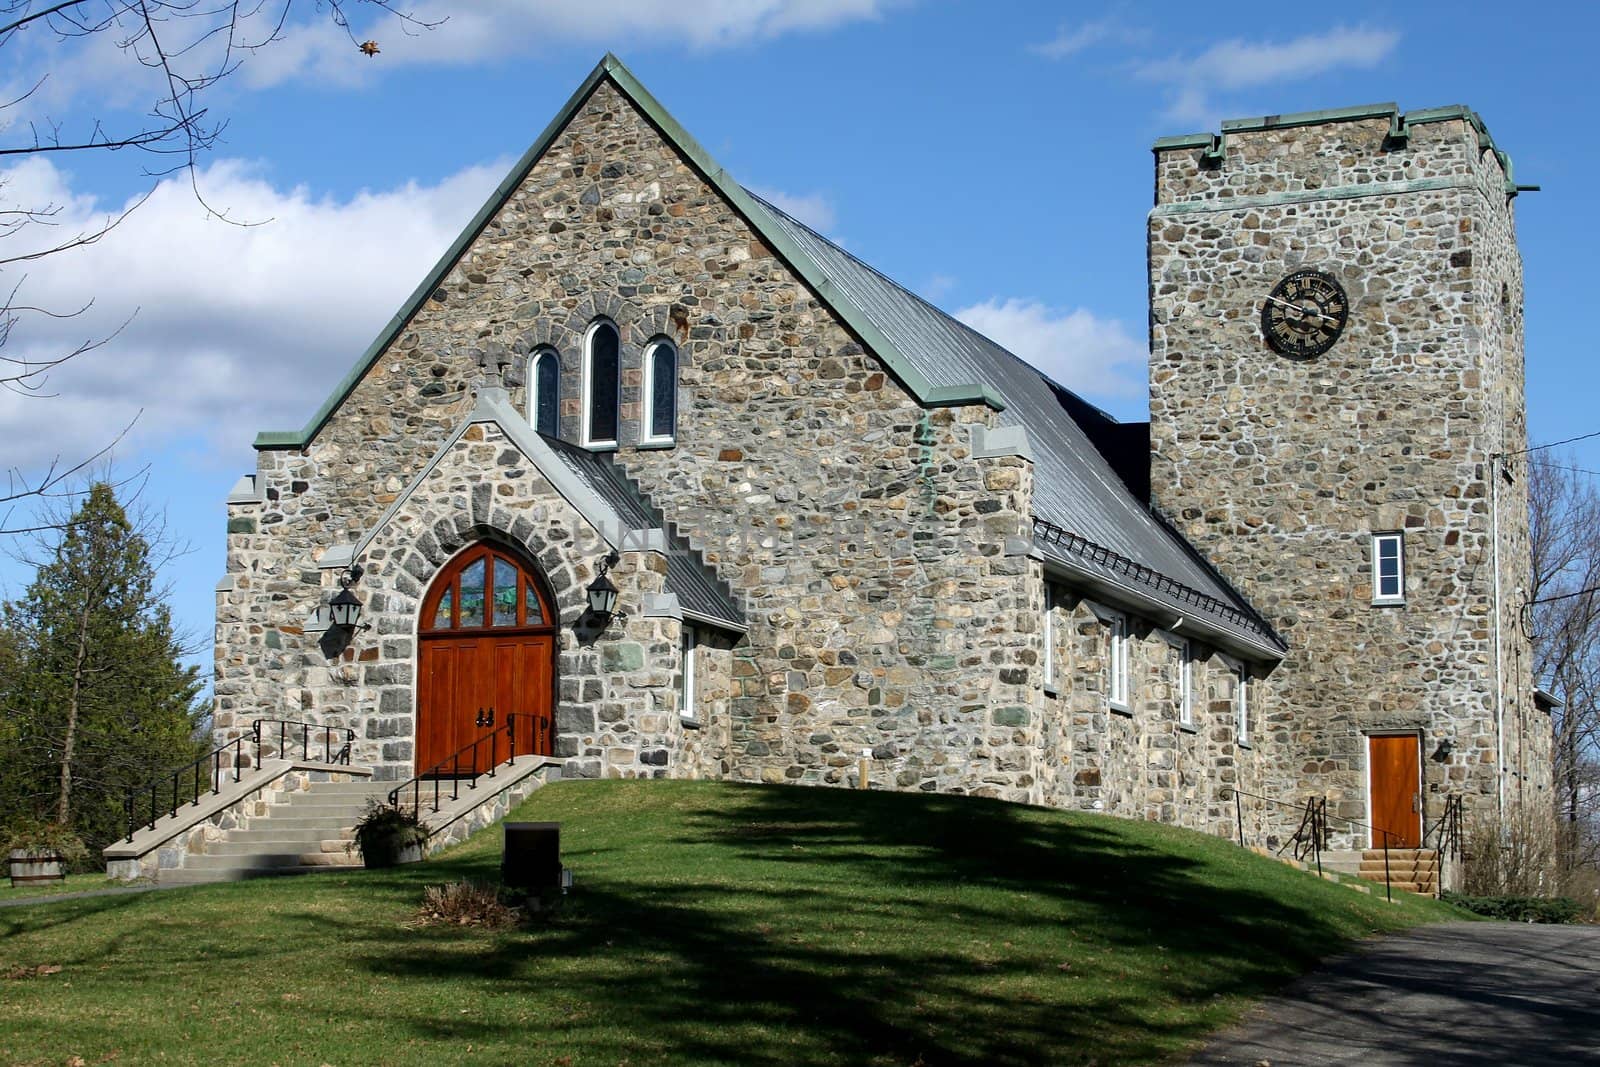 Century old church found in the eastern townships